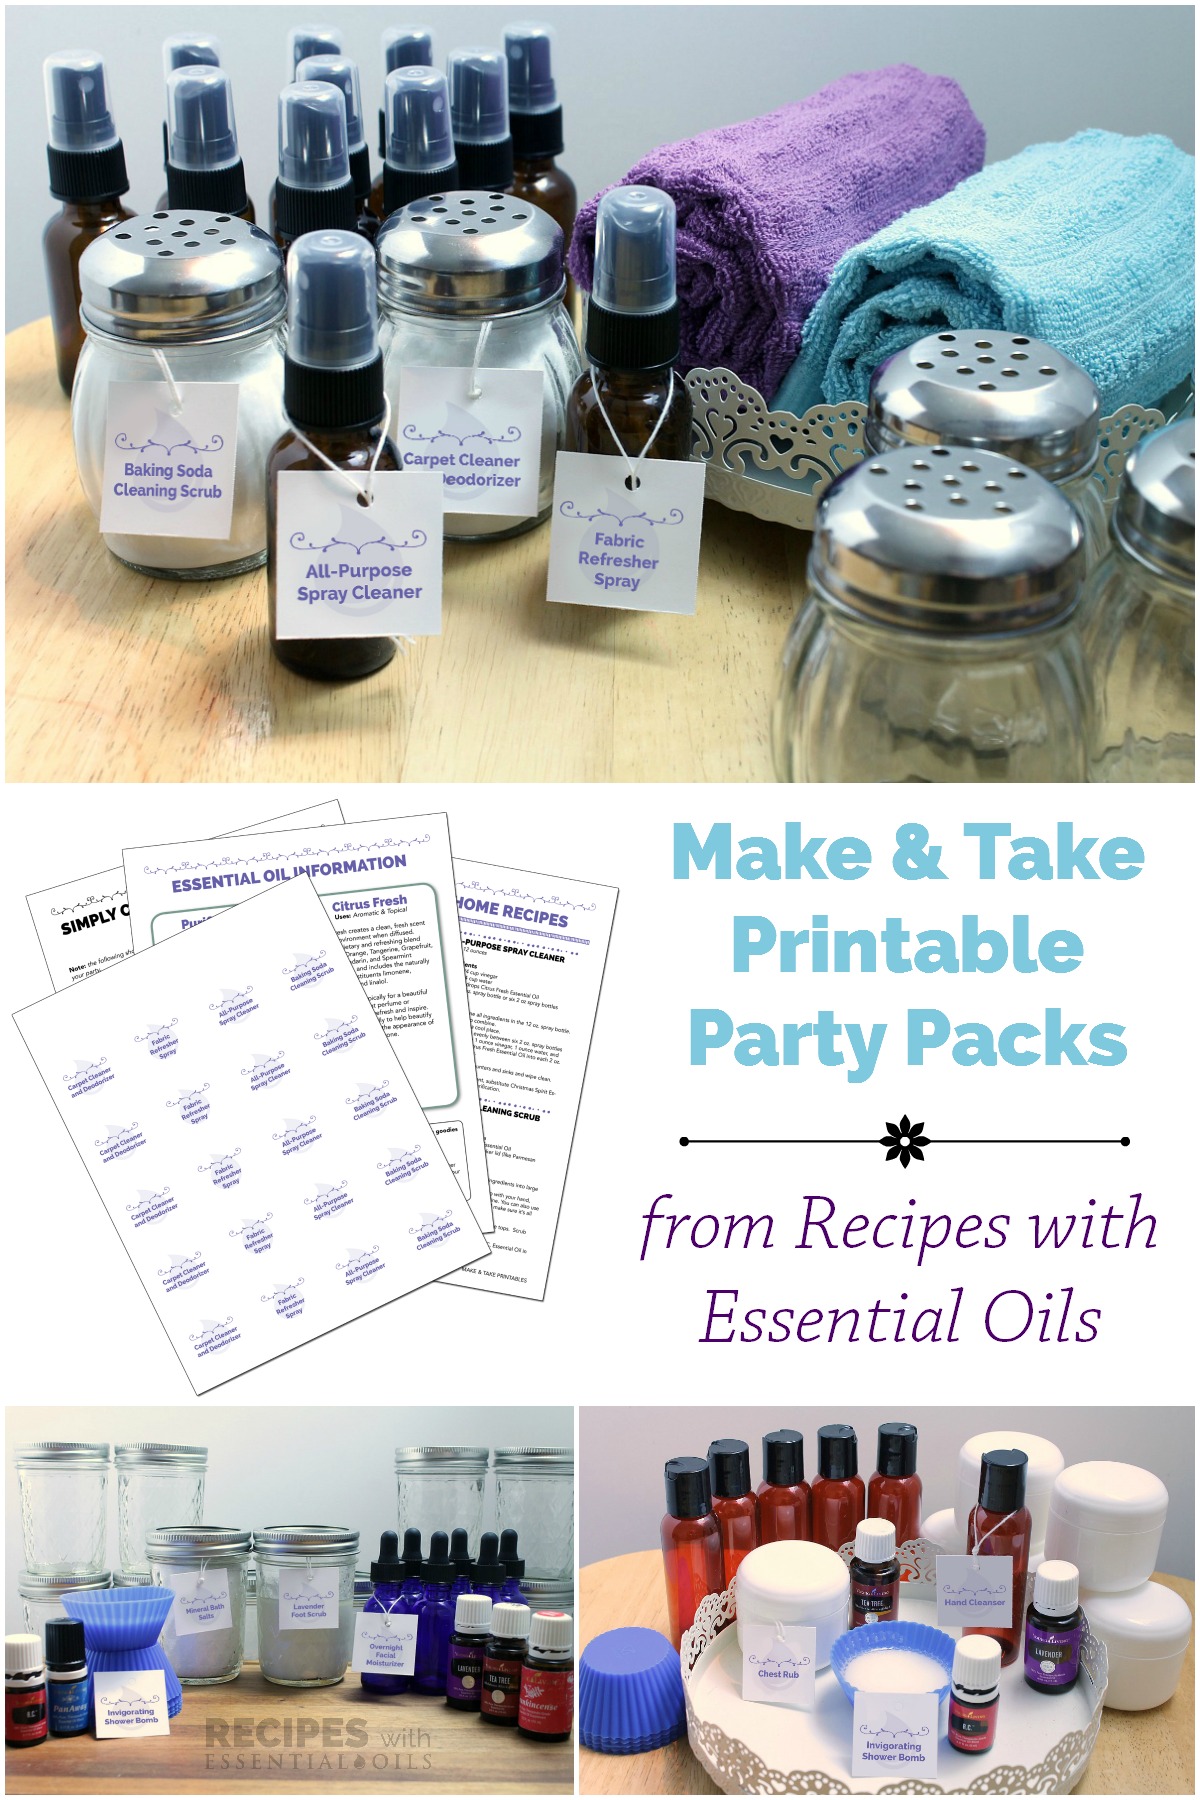 Make and Take Printable Party Packs from RecipeswithEssentialOils.com